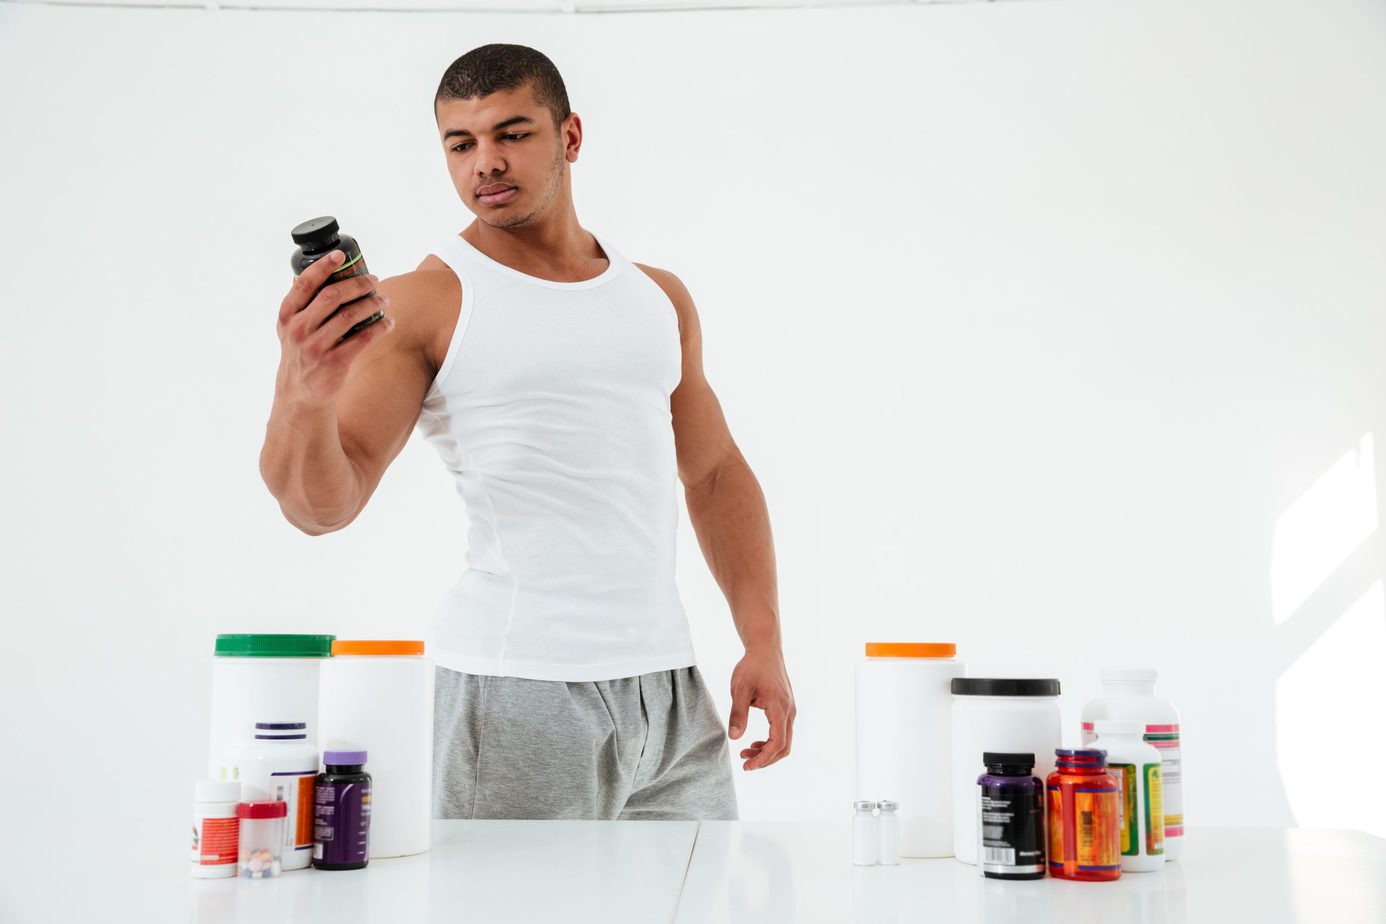 Minerals for the proper functioning of bodybuilder’s muscles